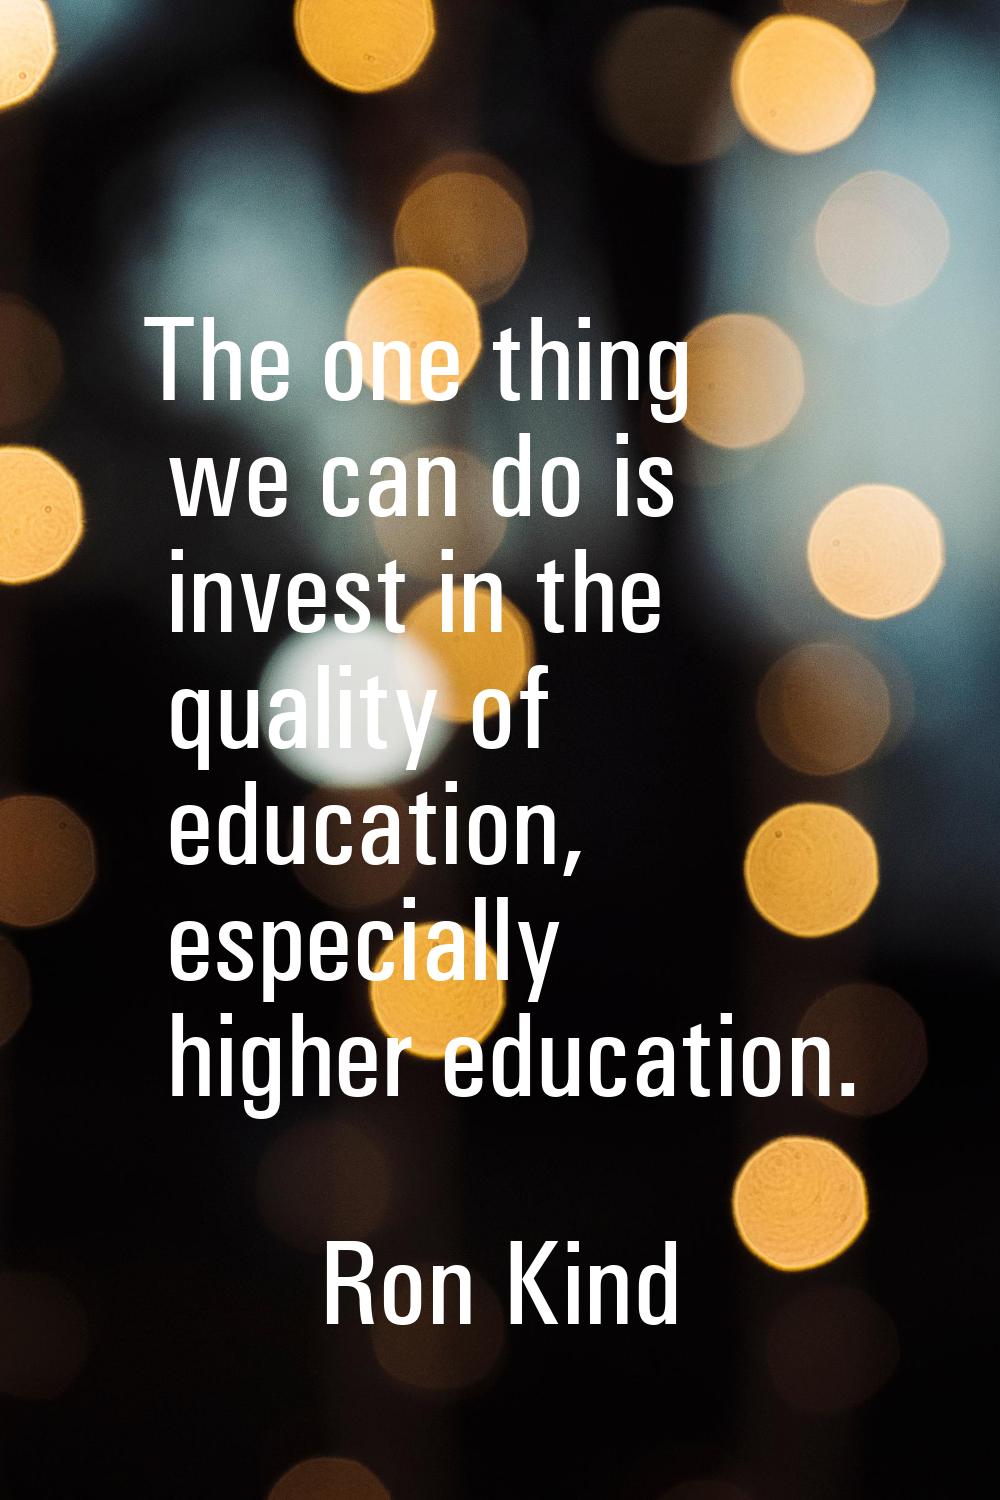 The one thing we can do is invest in the quality of education, especially higher education.